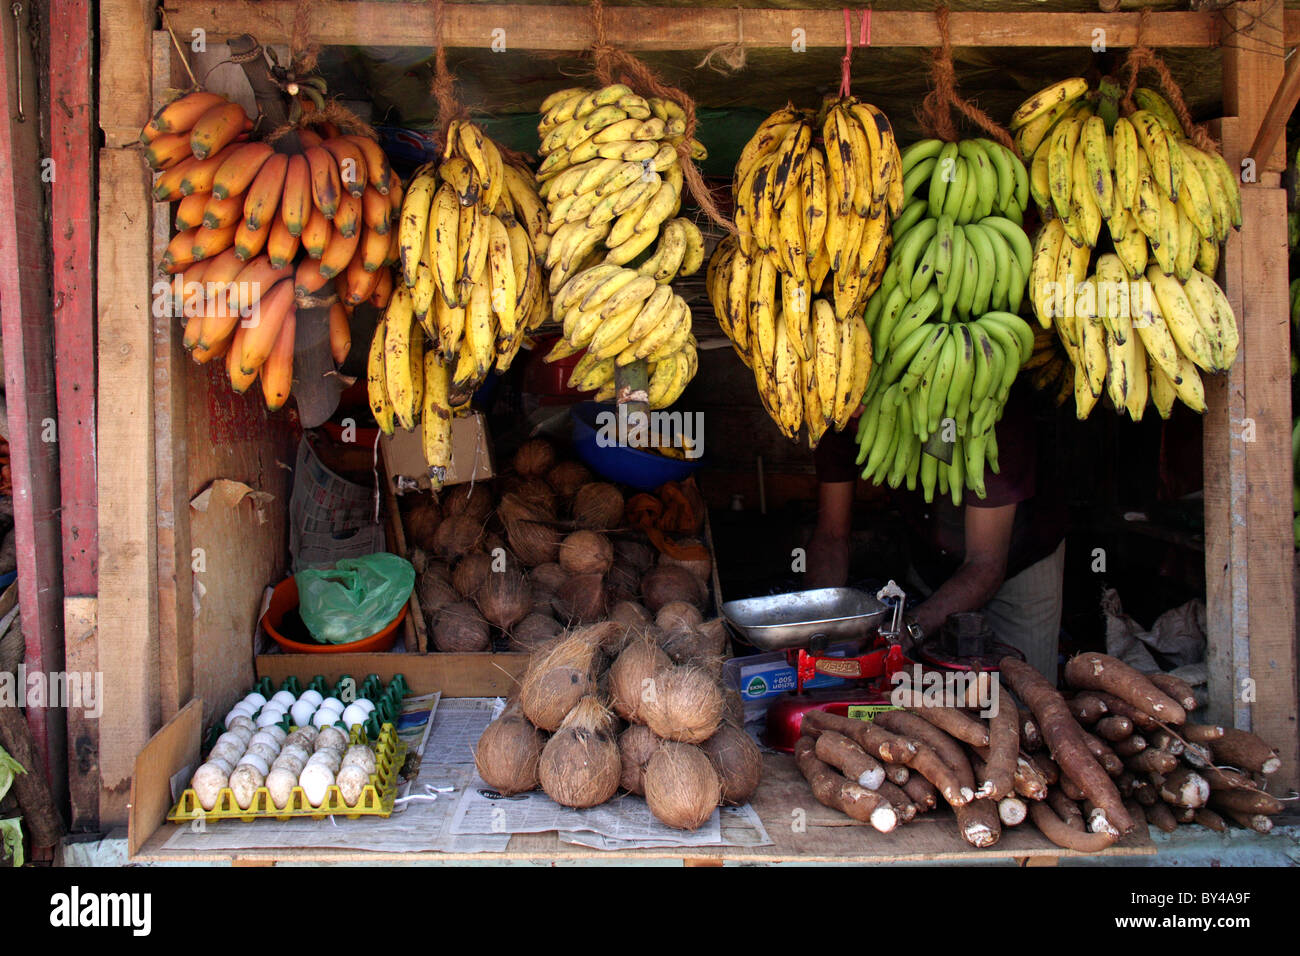 different  types of colourful banana's hanged and vegetables displayed from a vegetable shop Stock Photo